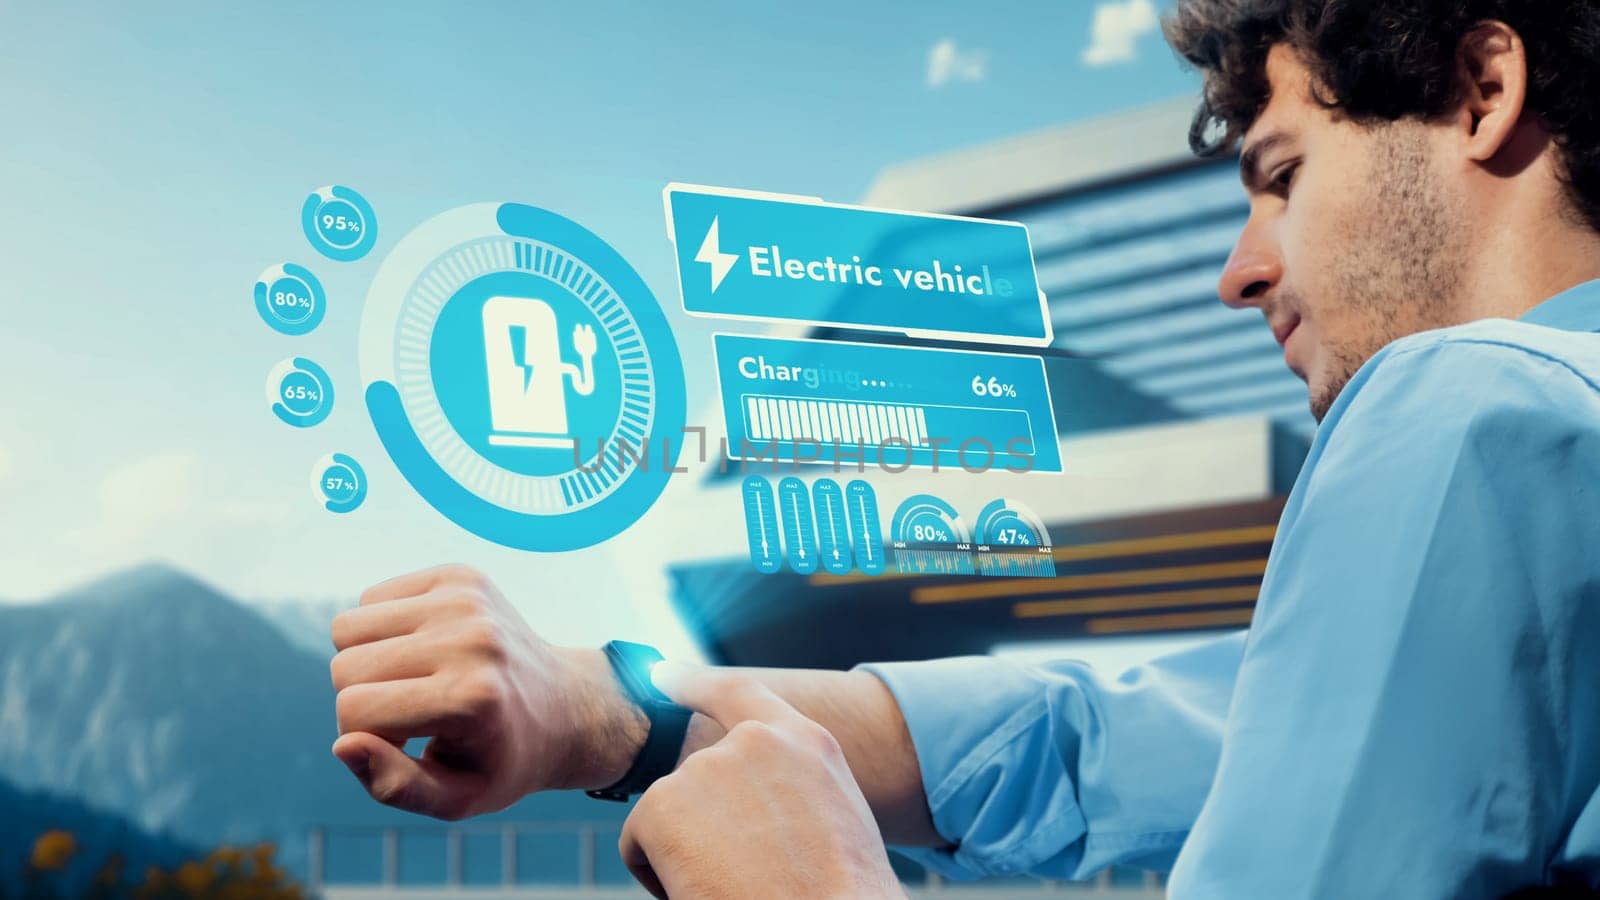 Businessman checking EV car digital battery status in hologram from smartwatch recharging at charging station, vacation and travel using eco-friendly electric car in natural outdoor background. Peruse